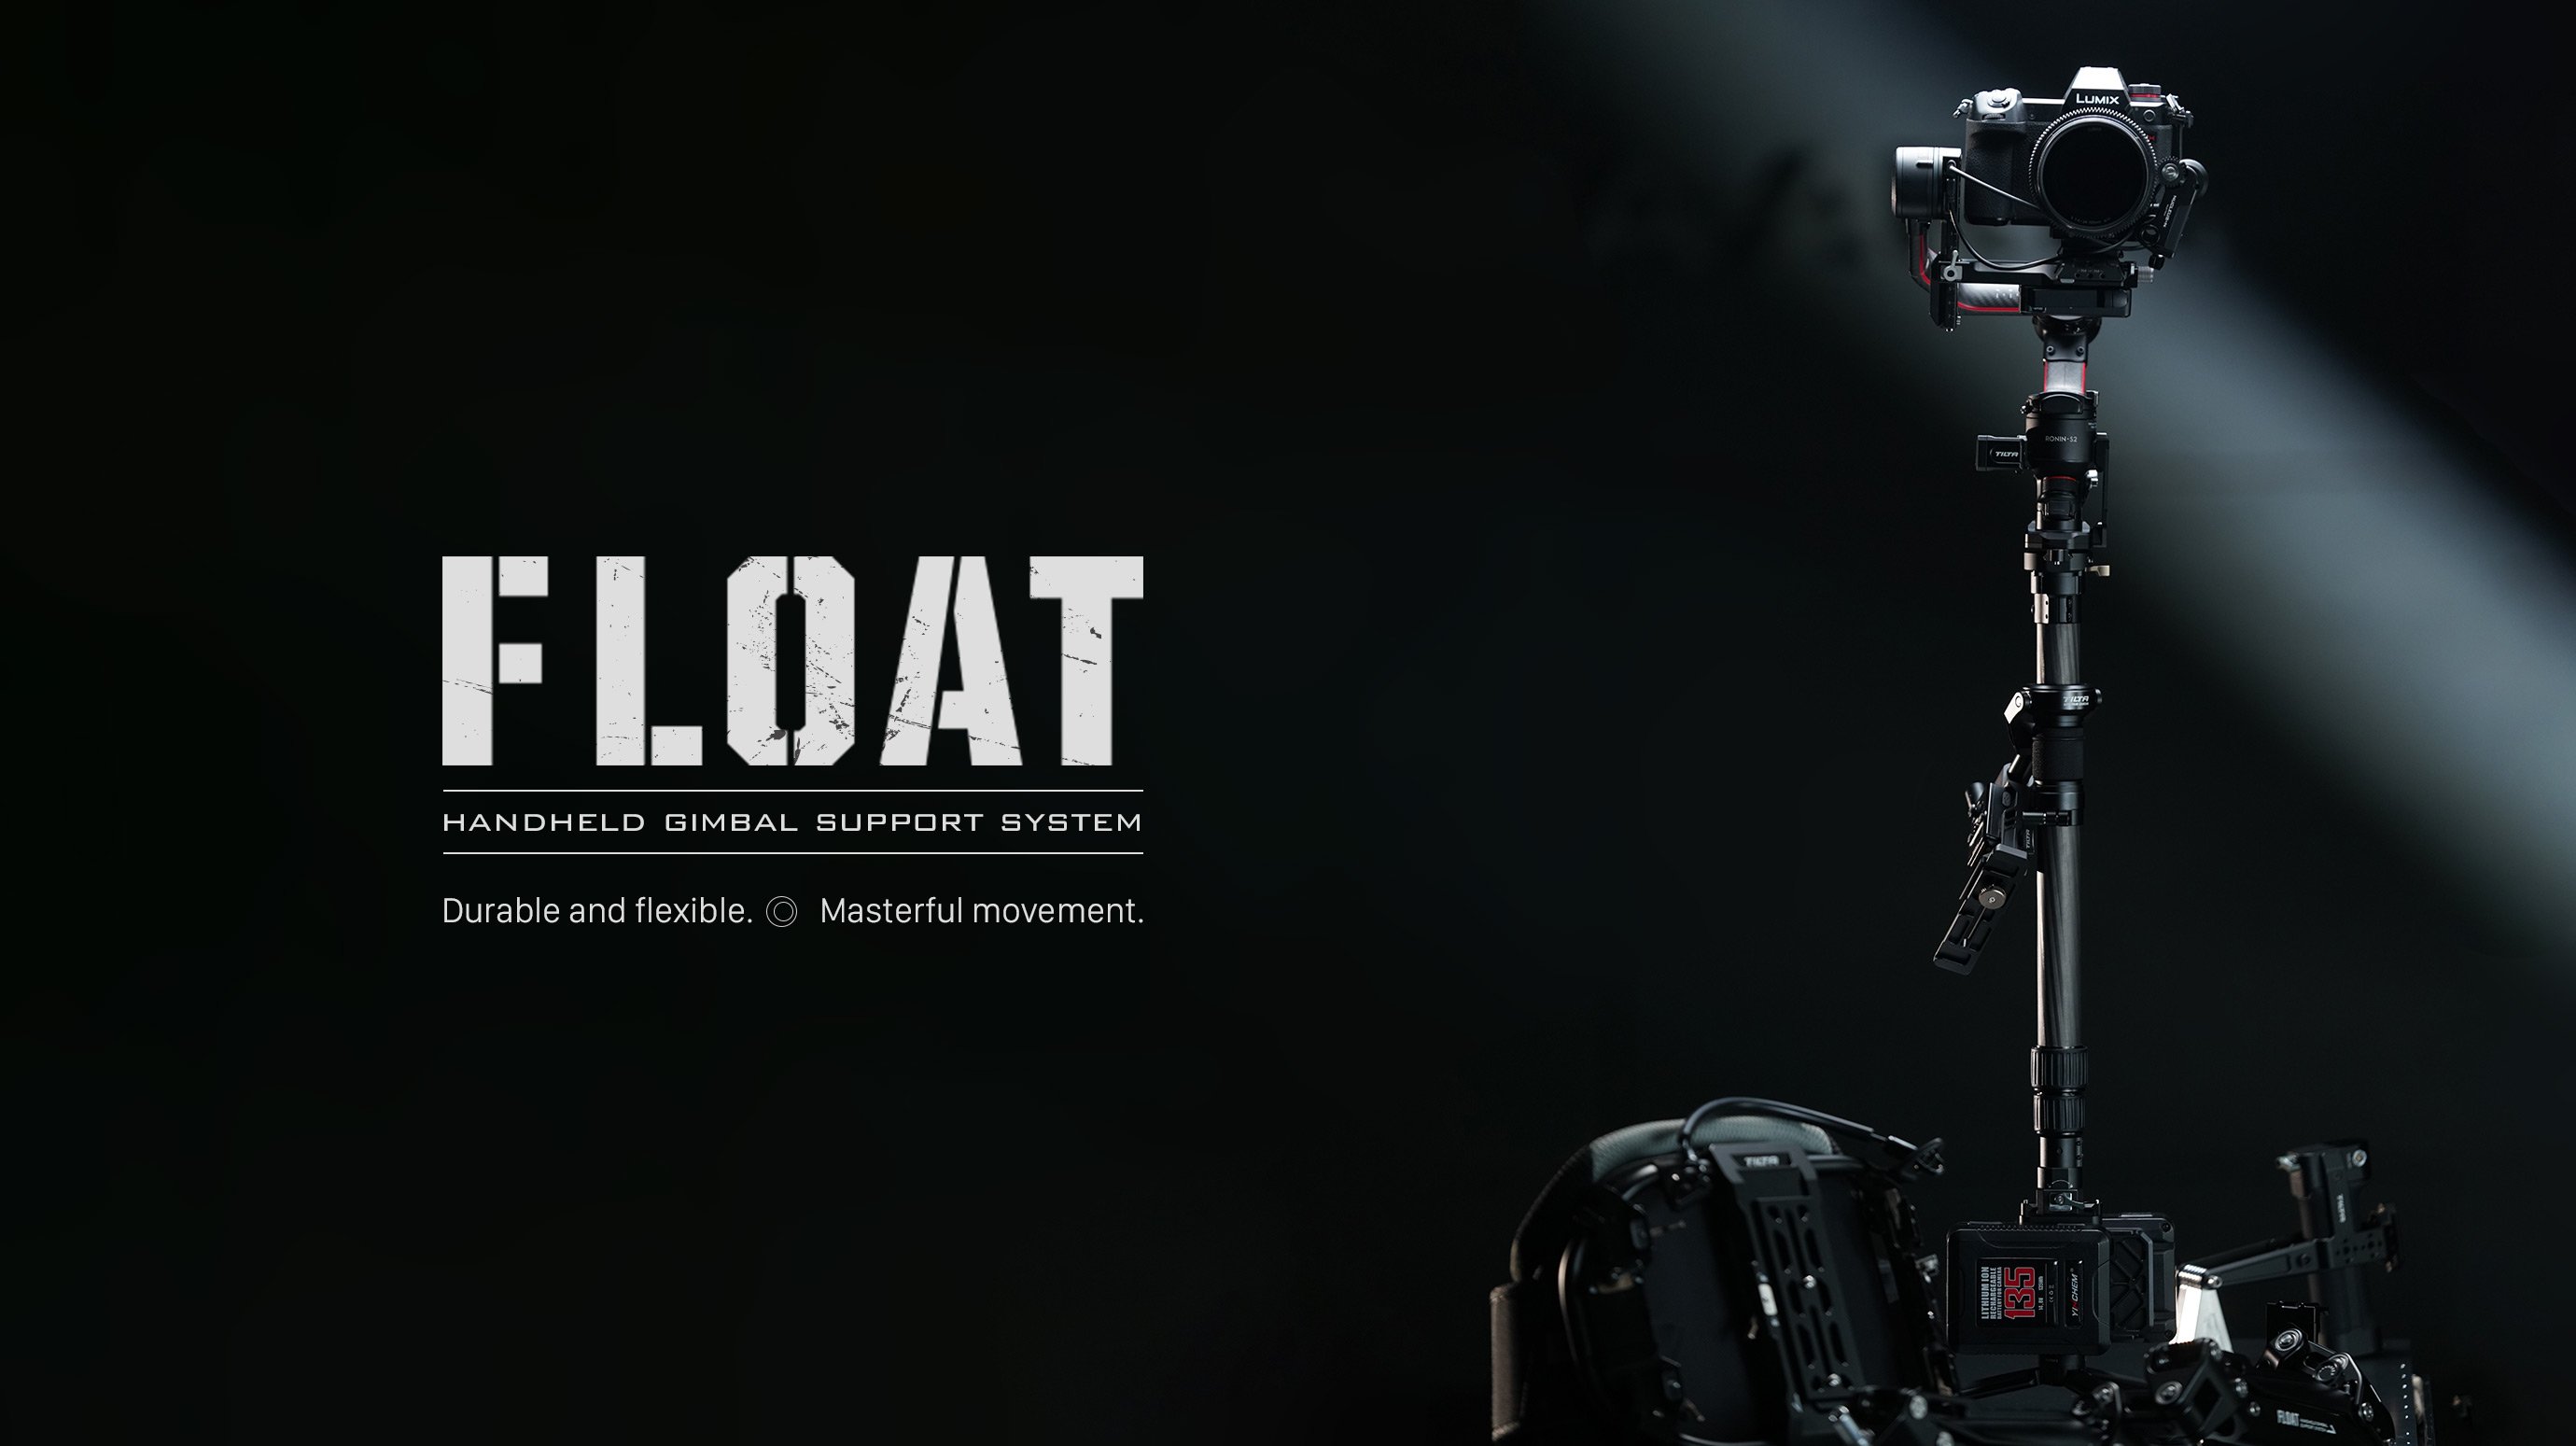 Tilta Float Handheld Gimbal Support System Overview for RS2